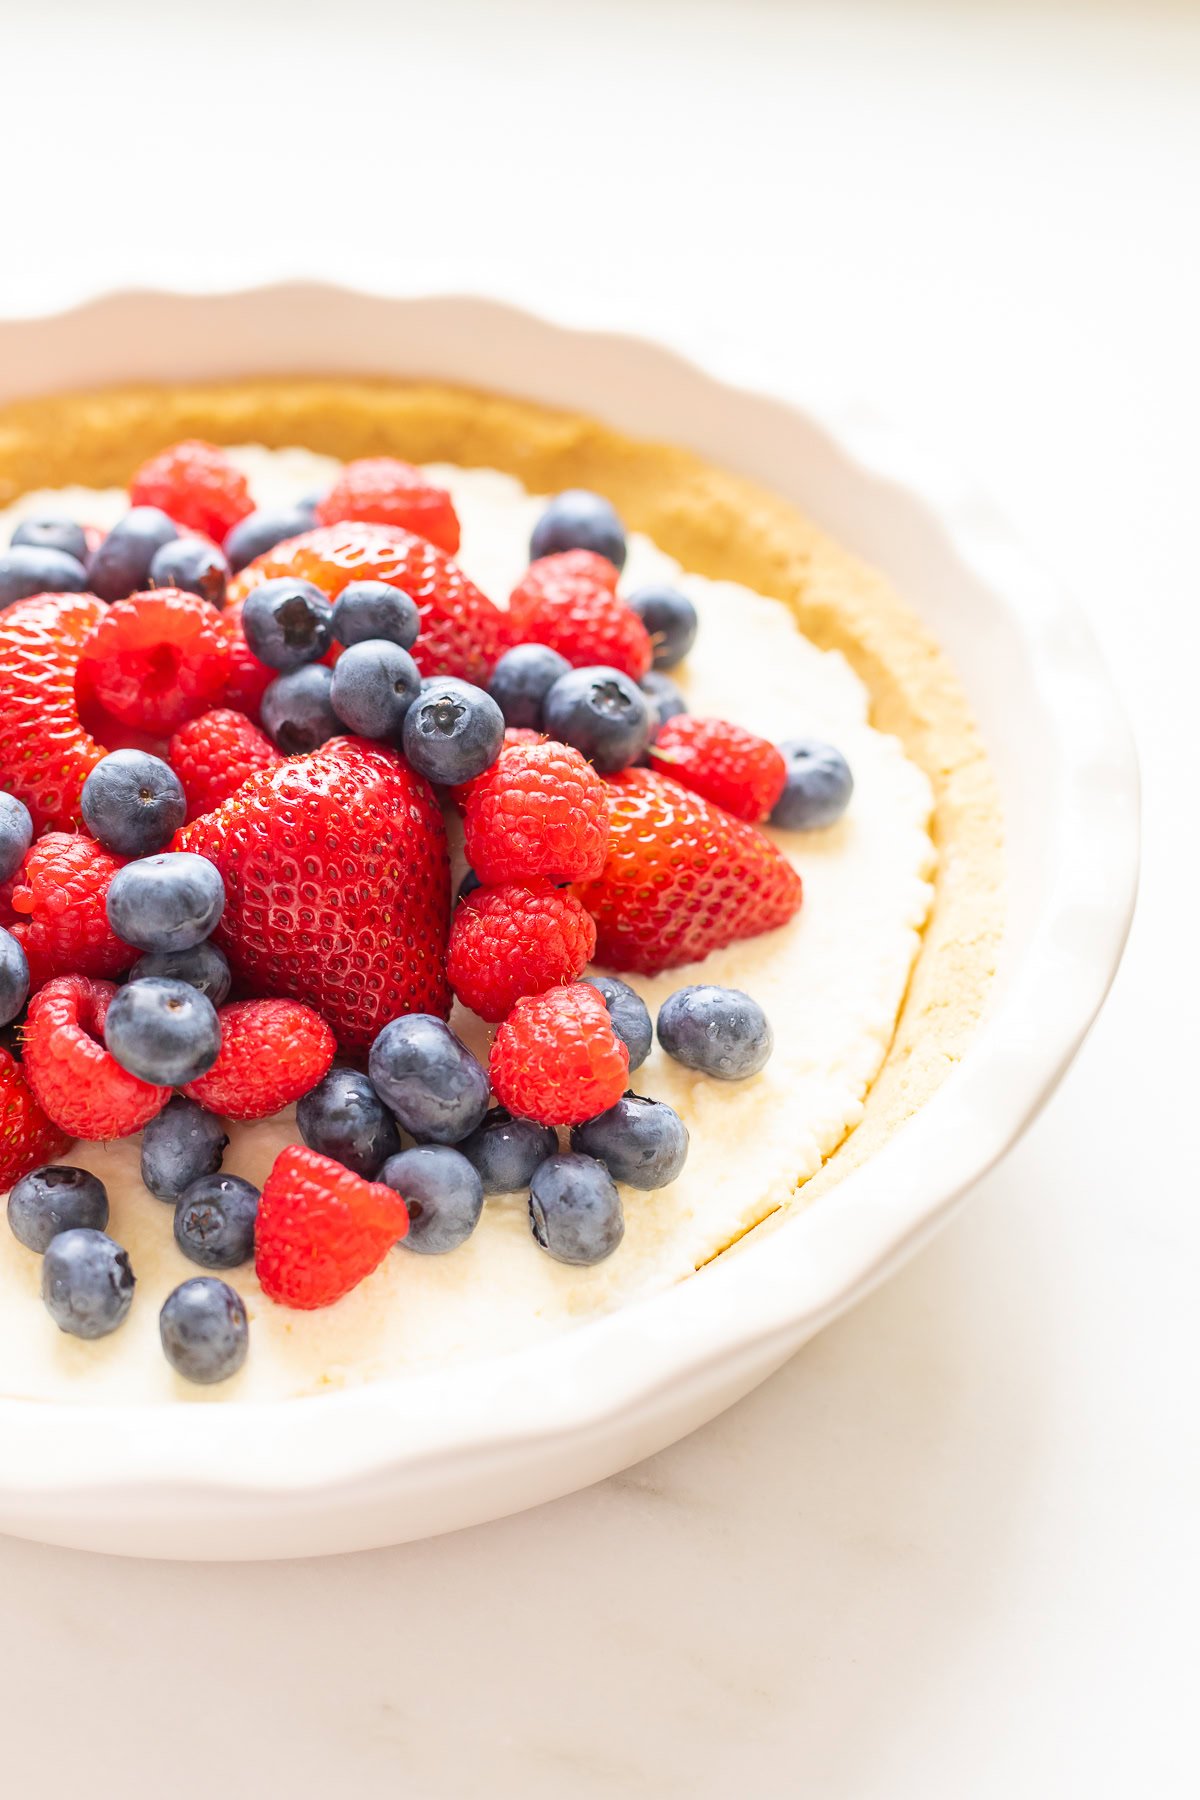 A no bake lemon pie topped with fresh strawberries, blueberries, and raspberries.